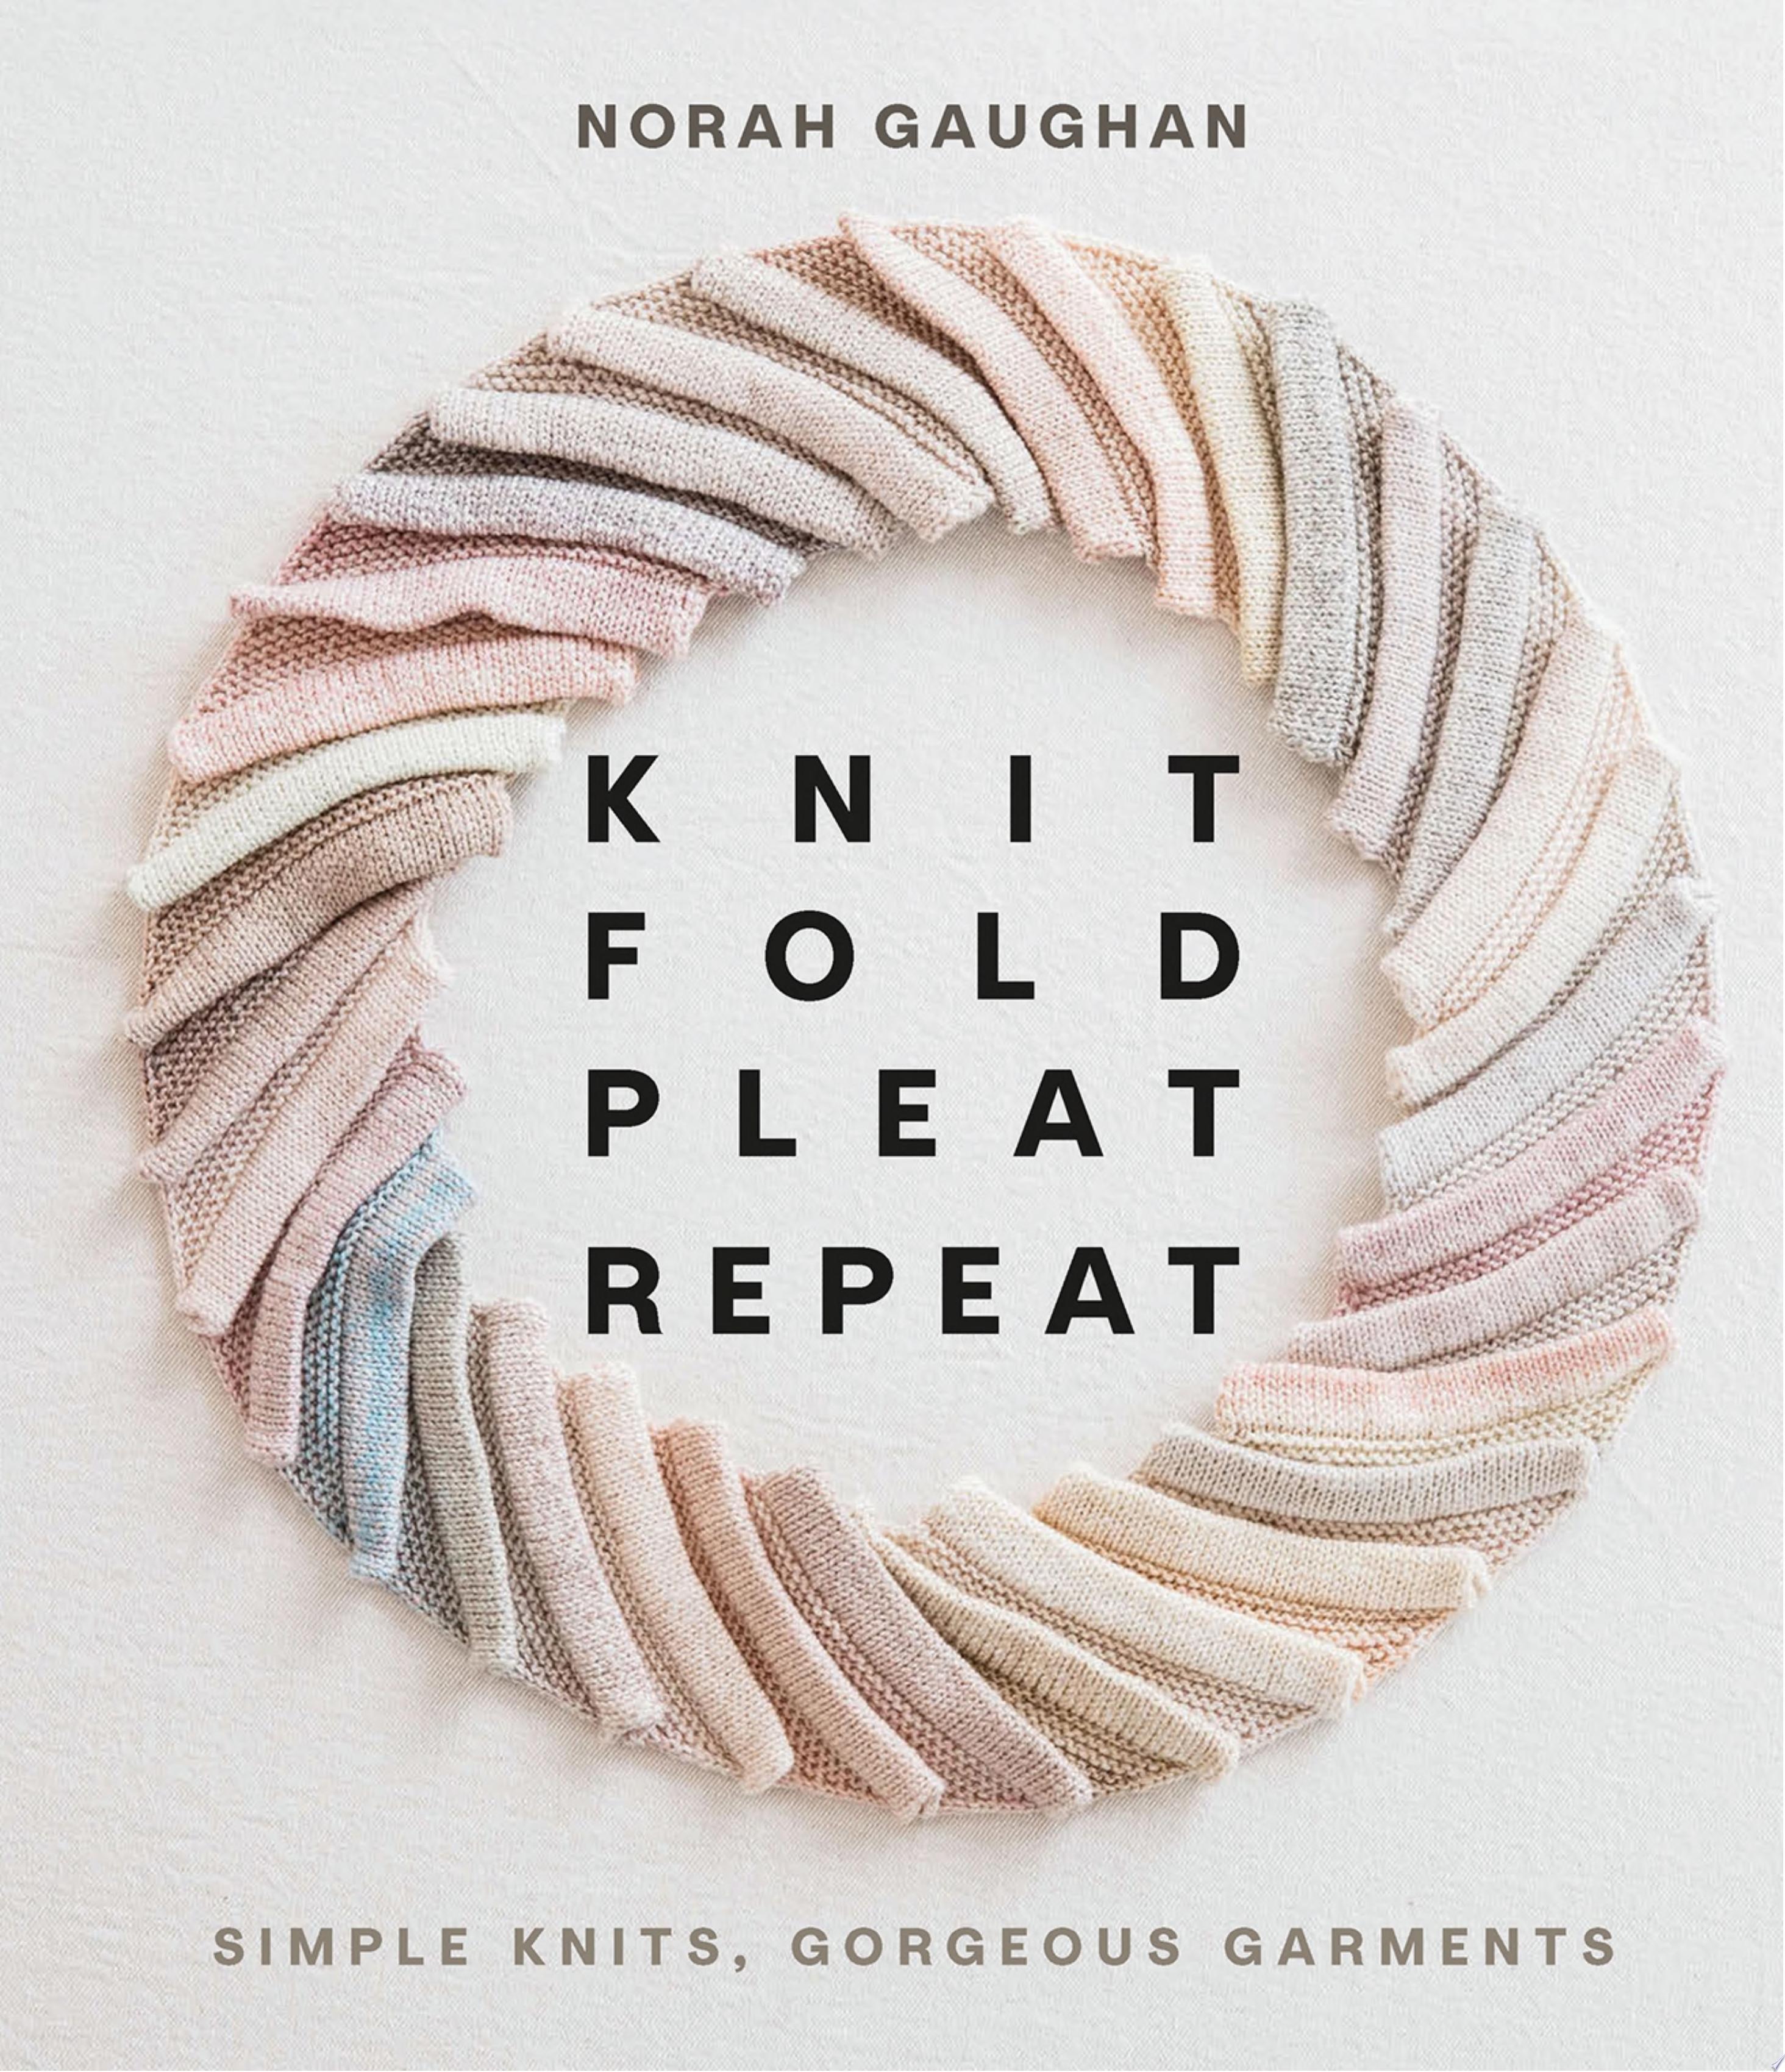 Image for "Knit Fold Pleat Repeat"